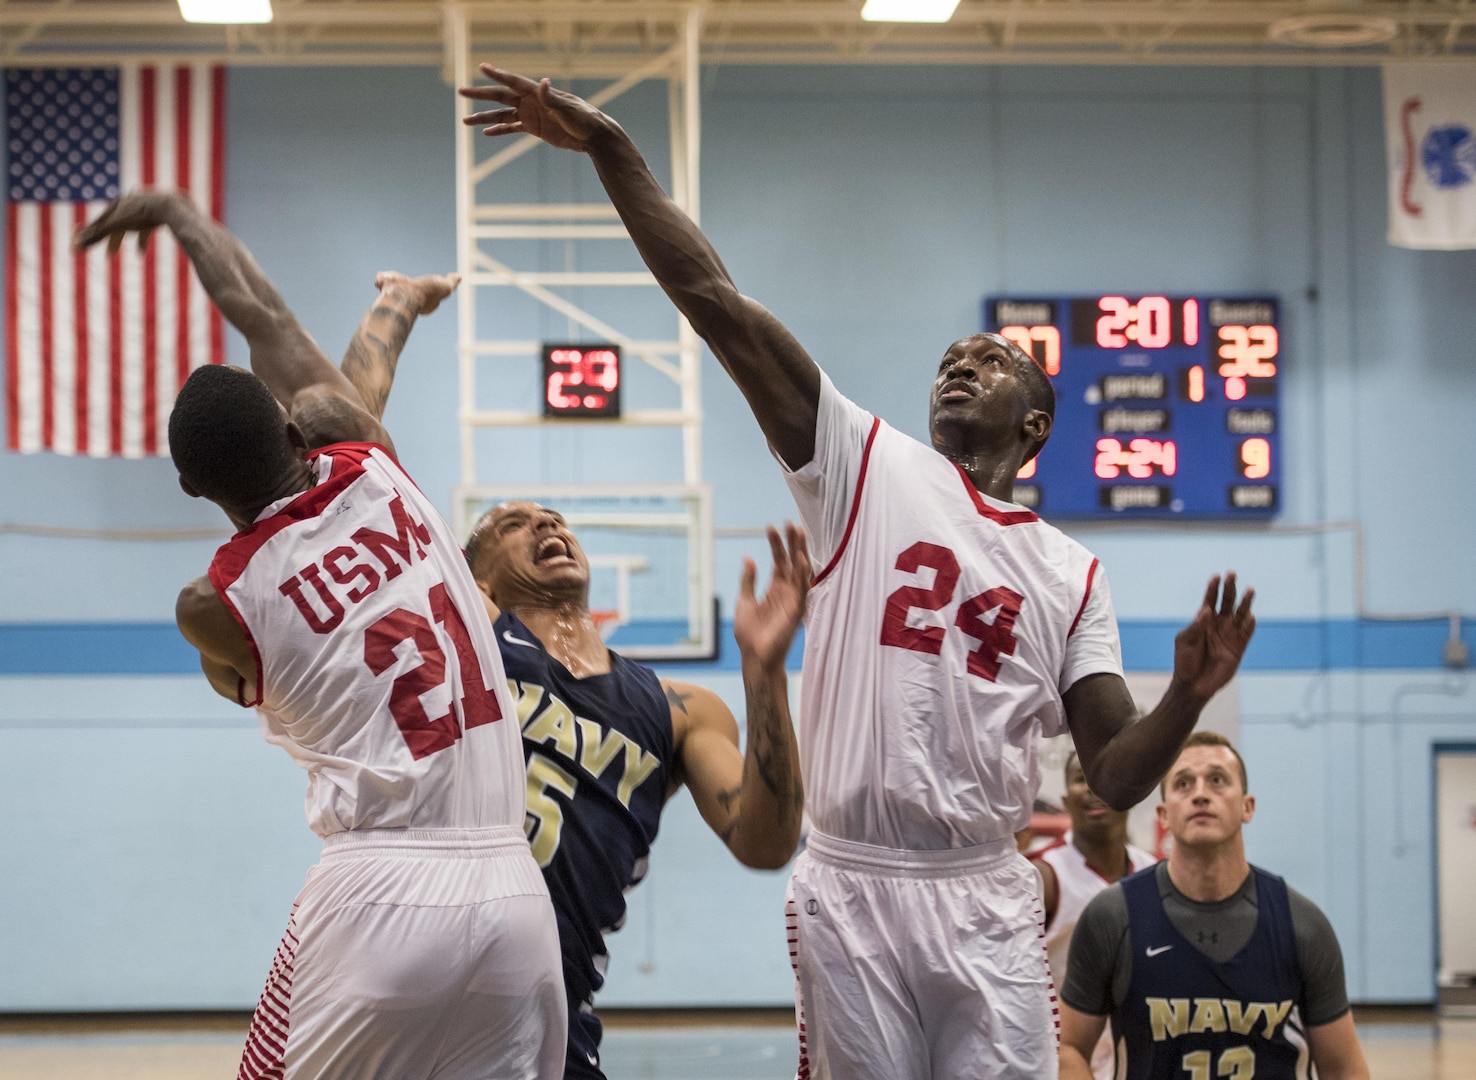 SAN ANTONIO (Nov. 02, 2017) - Members of the U.S. Marine Corps men's basketball team block U.S. Navy Petty Officer Marquel Delancey's shot during a basketball game. The 2017 Armed Forces Basketball Championship is held at Joint Base San Antonio, Lackland Air Force Base from 1-7 November. The best two teams during the double round robin will face each other for the 2017 Armed Forces crown. (U.S. Navy photo by Mass Communication Specialist 2nd Class Emiline L. M. Senn/Released)